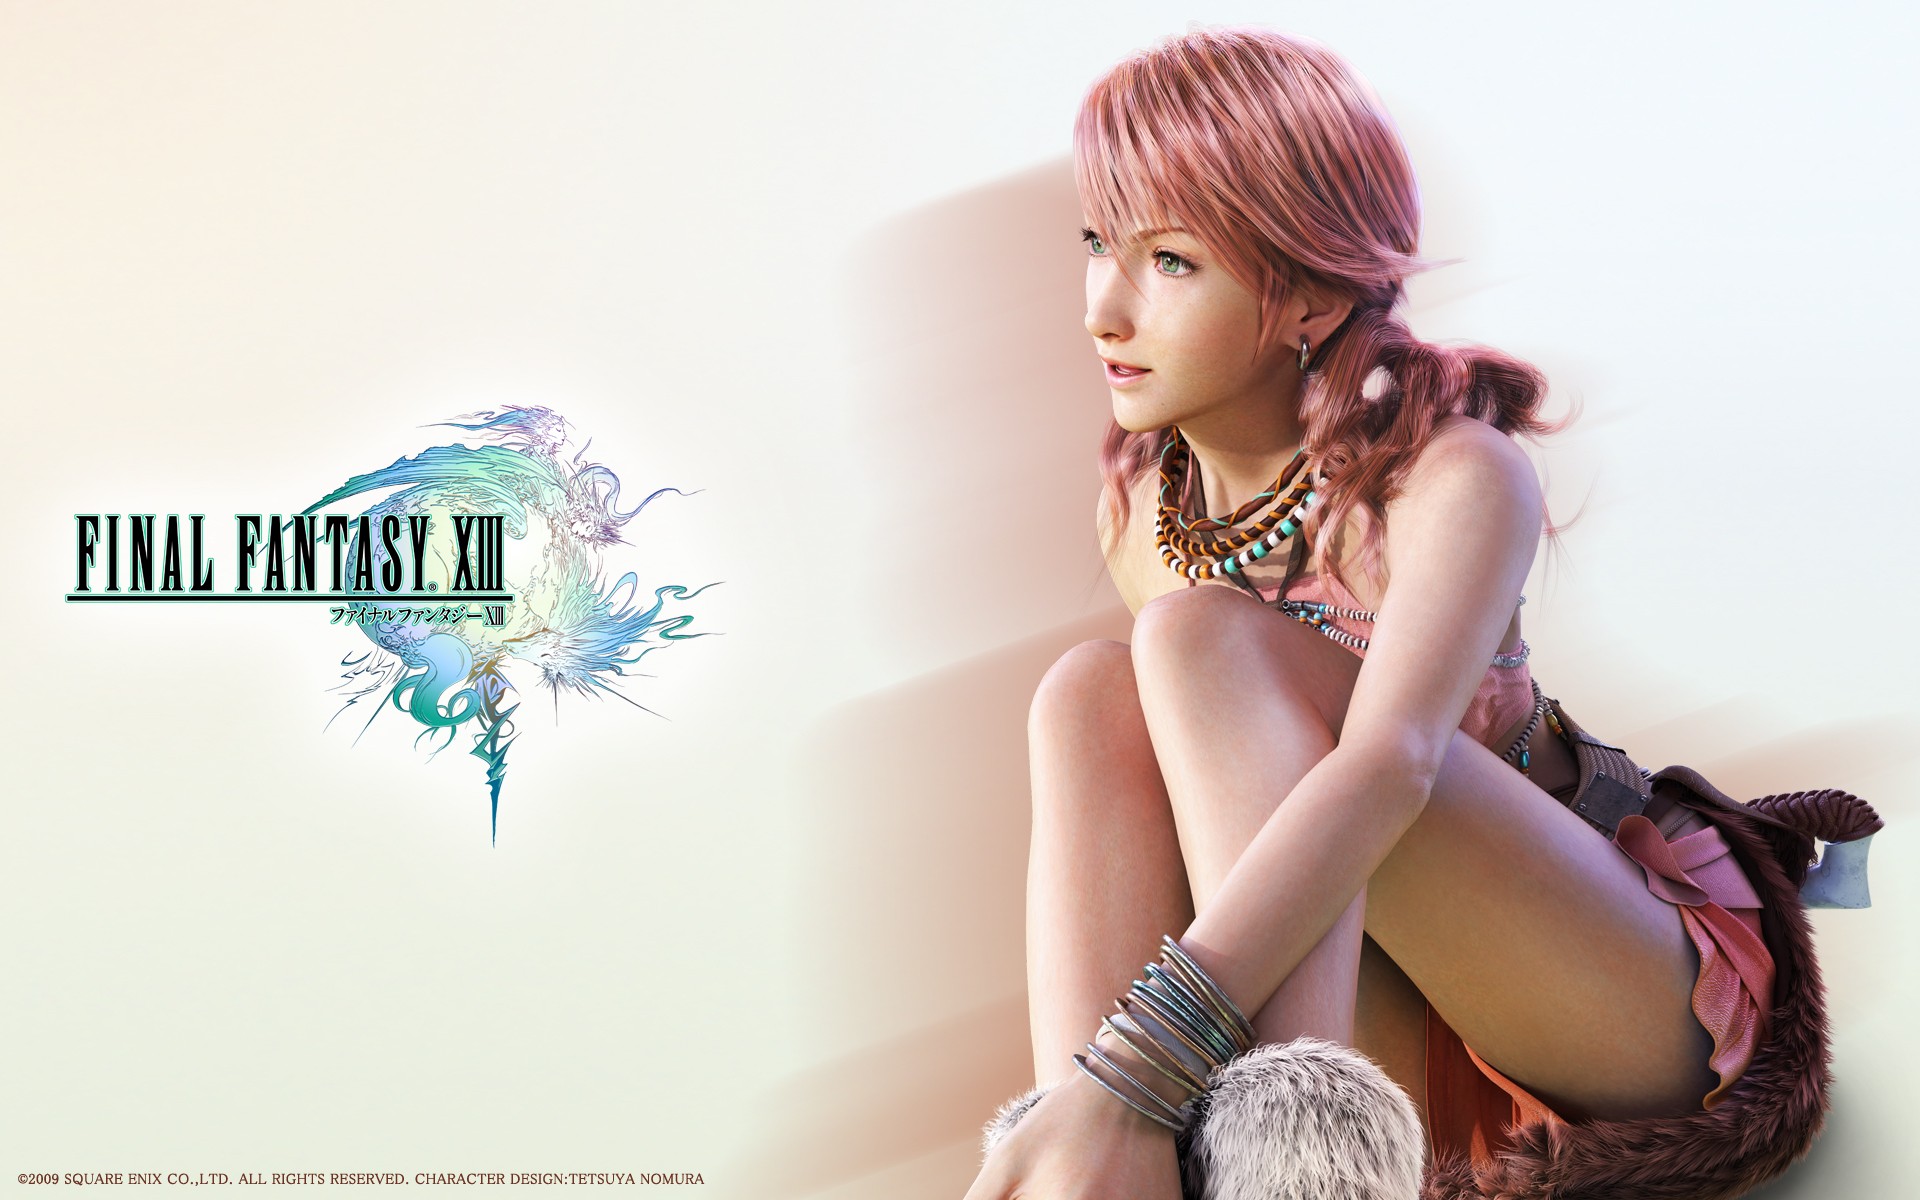 Final Fantasy Xiii To Land On Steam For Linux Rumor